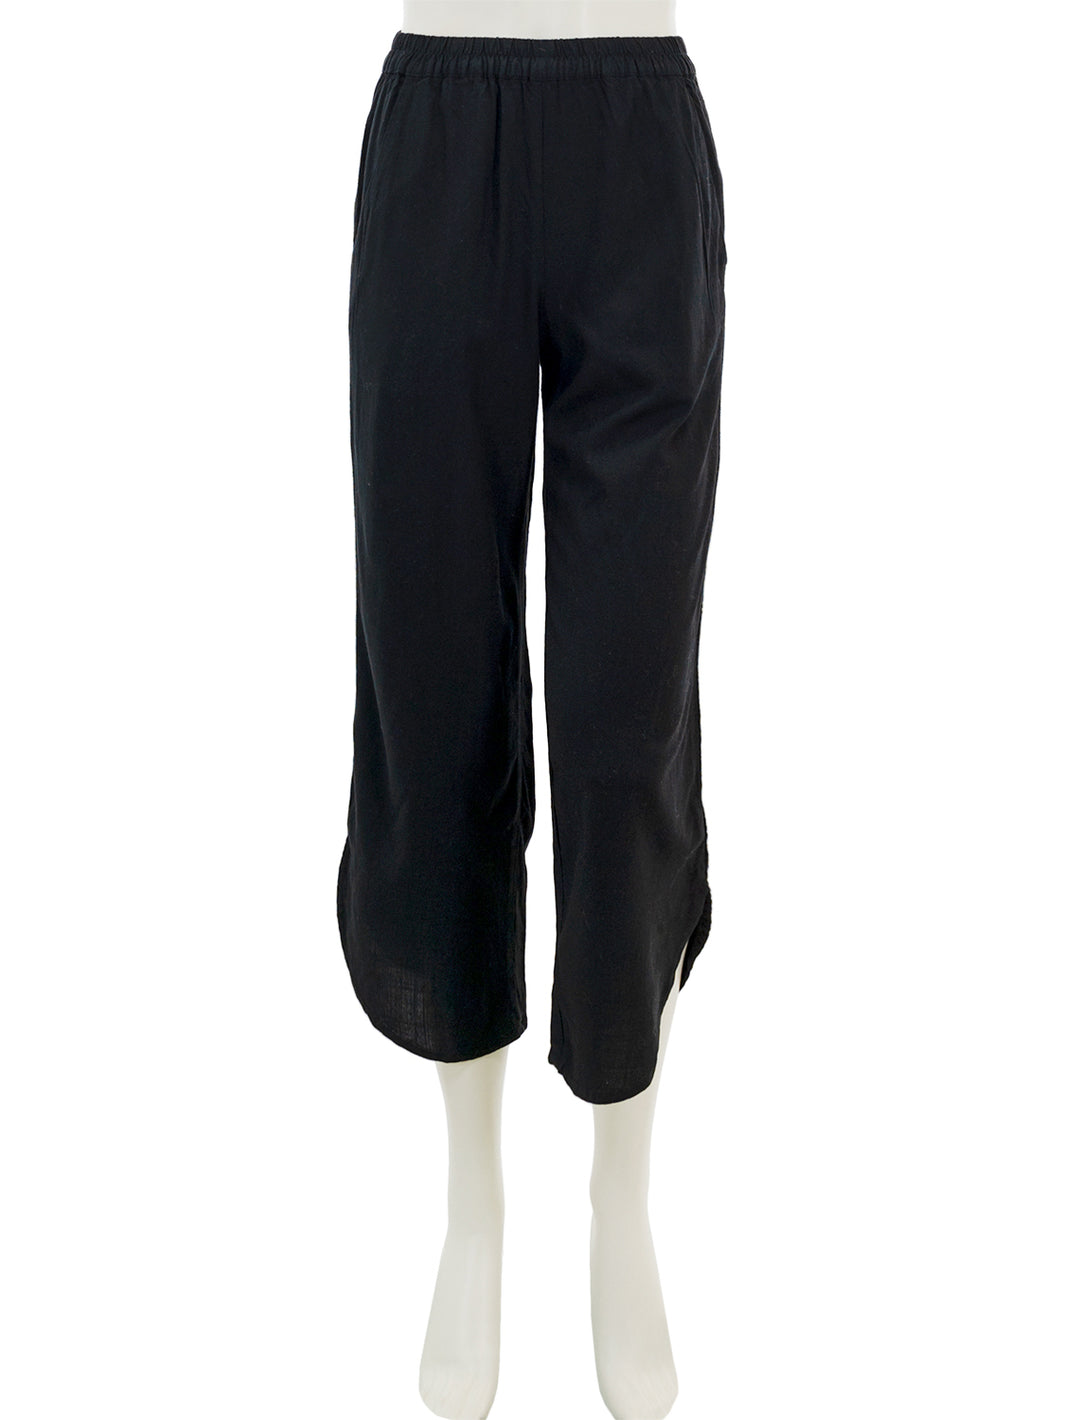 Front view of Marine Layer's wide leg allison pant in black.